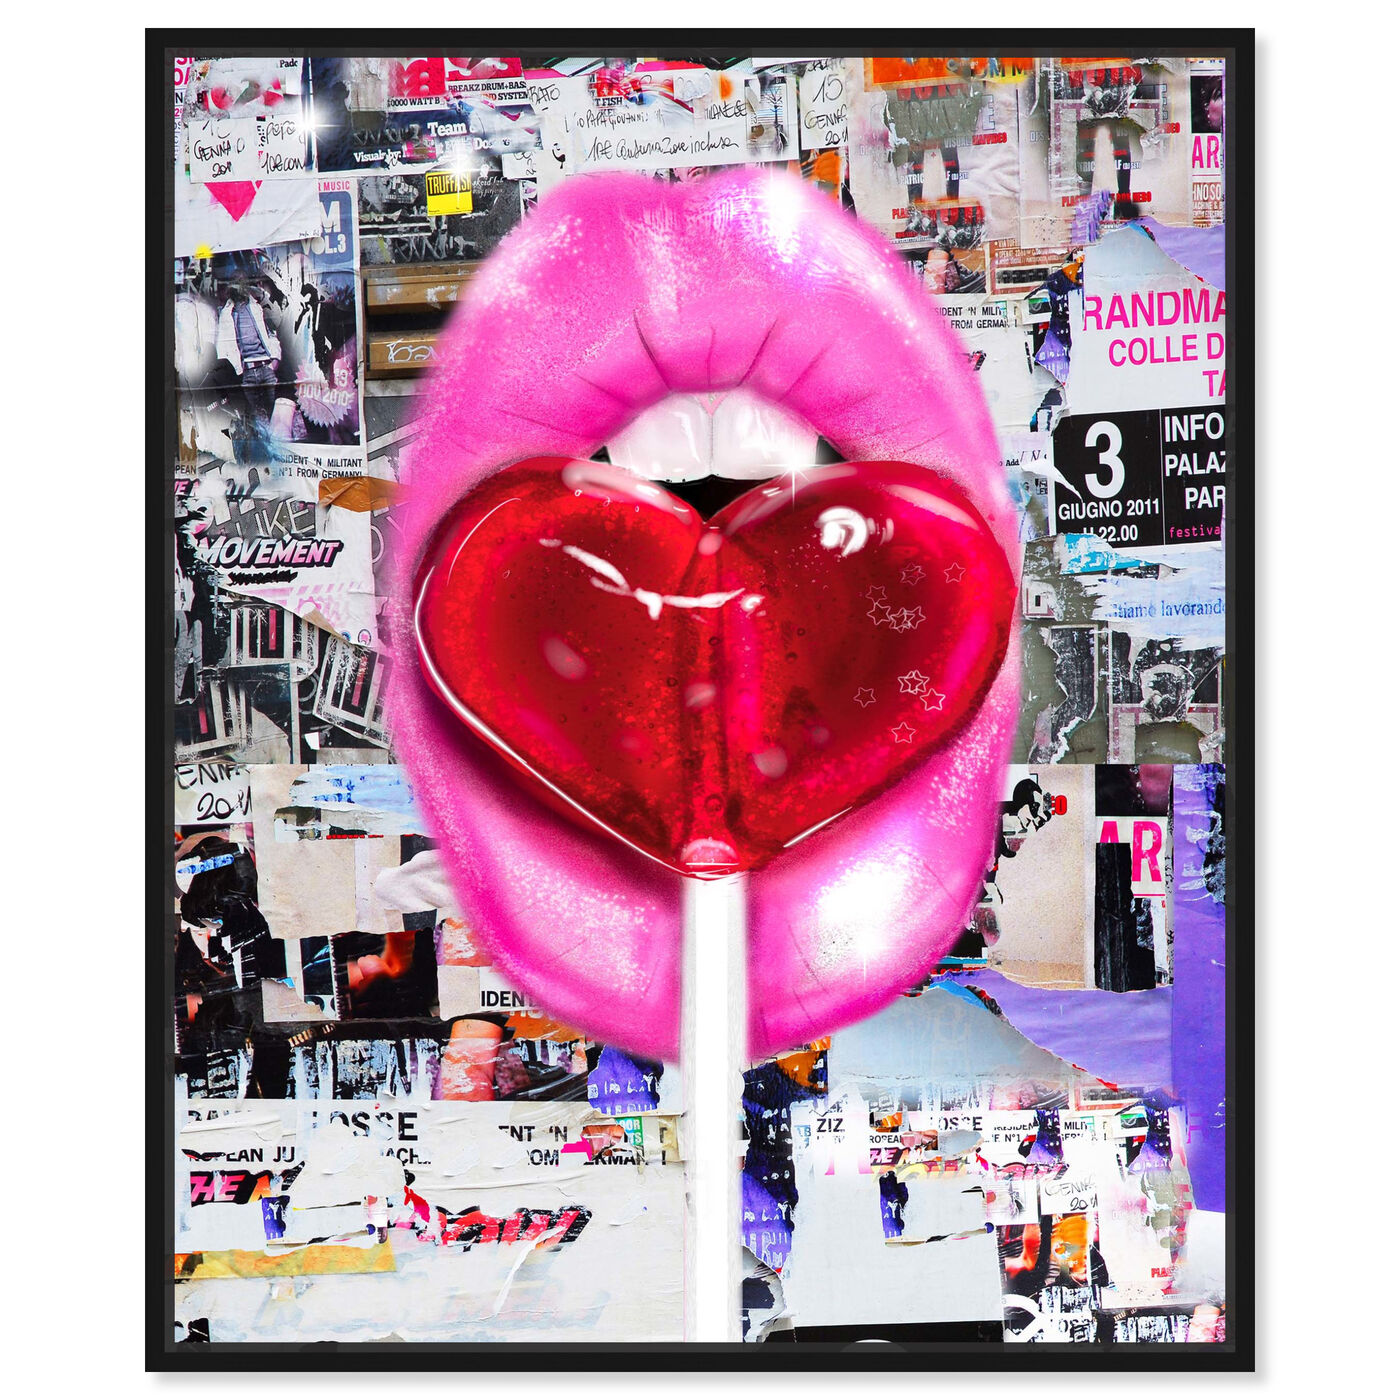 Charmed I'm Sure - Candy Pop Art Print by Art of Spanjer - BIG Wall Décor